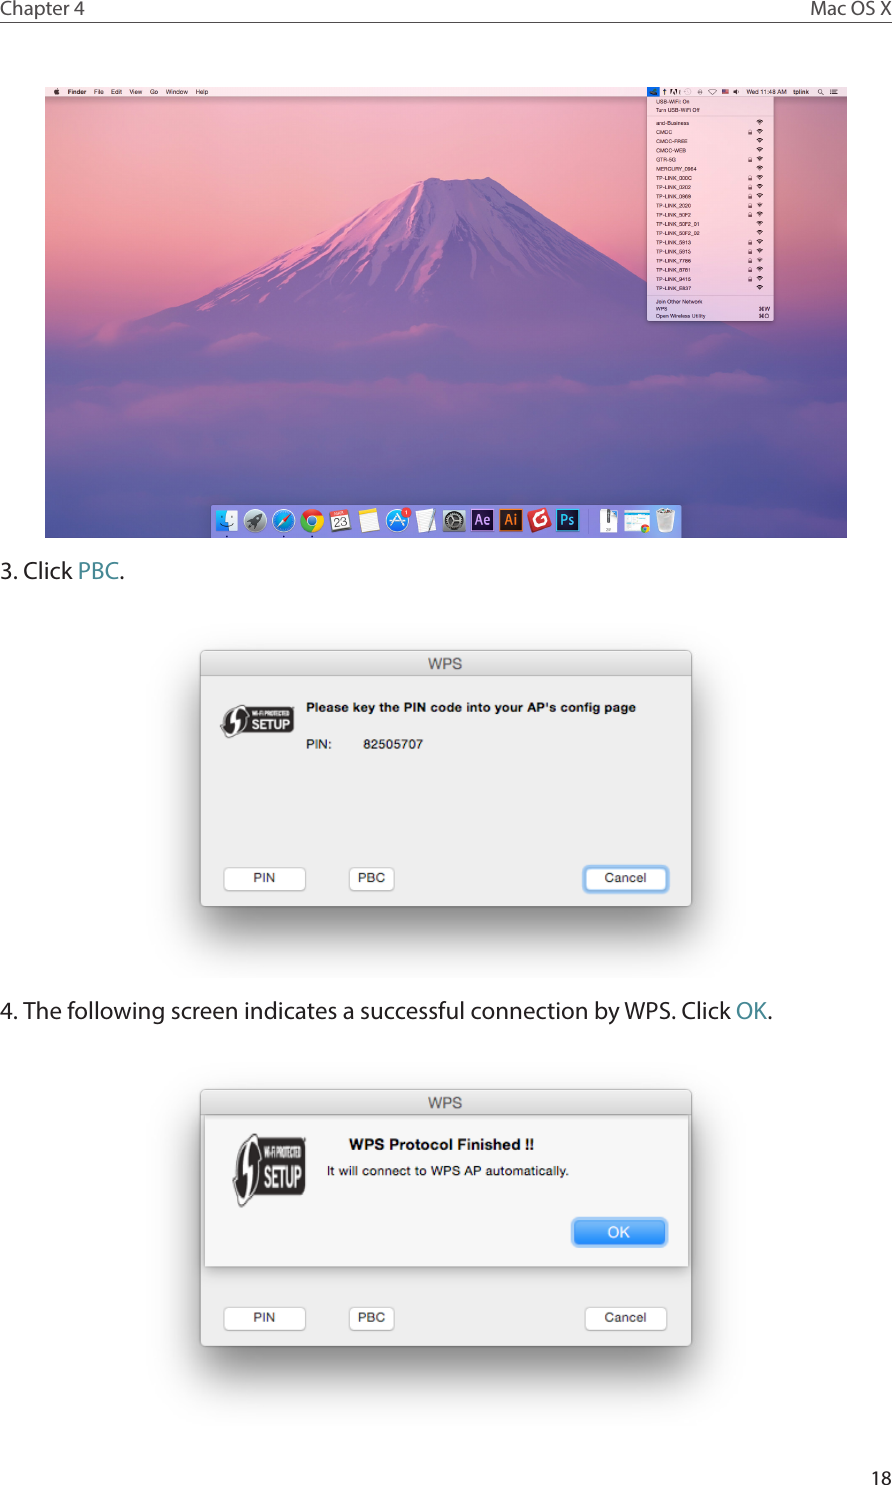 18Chapter 4 Mac OS X3. Click PBC.4. The following screen indicates a successful connection by WPS. Click OK.